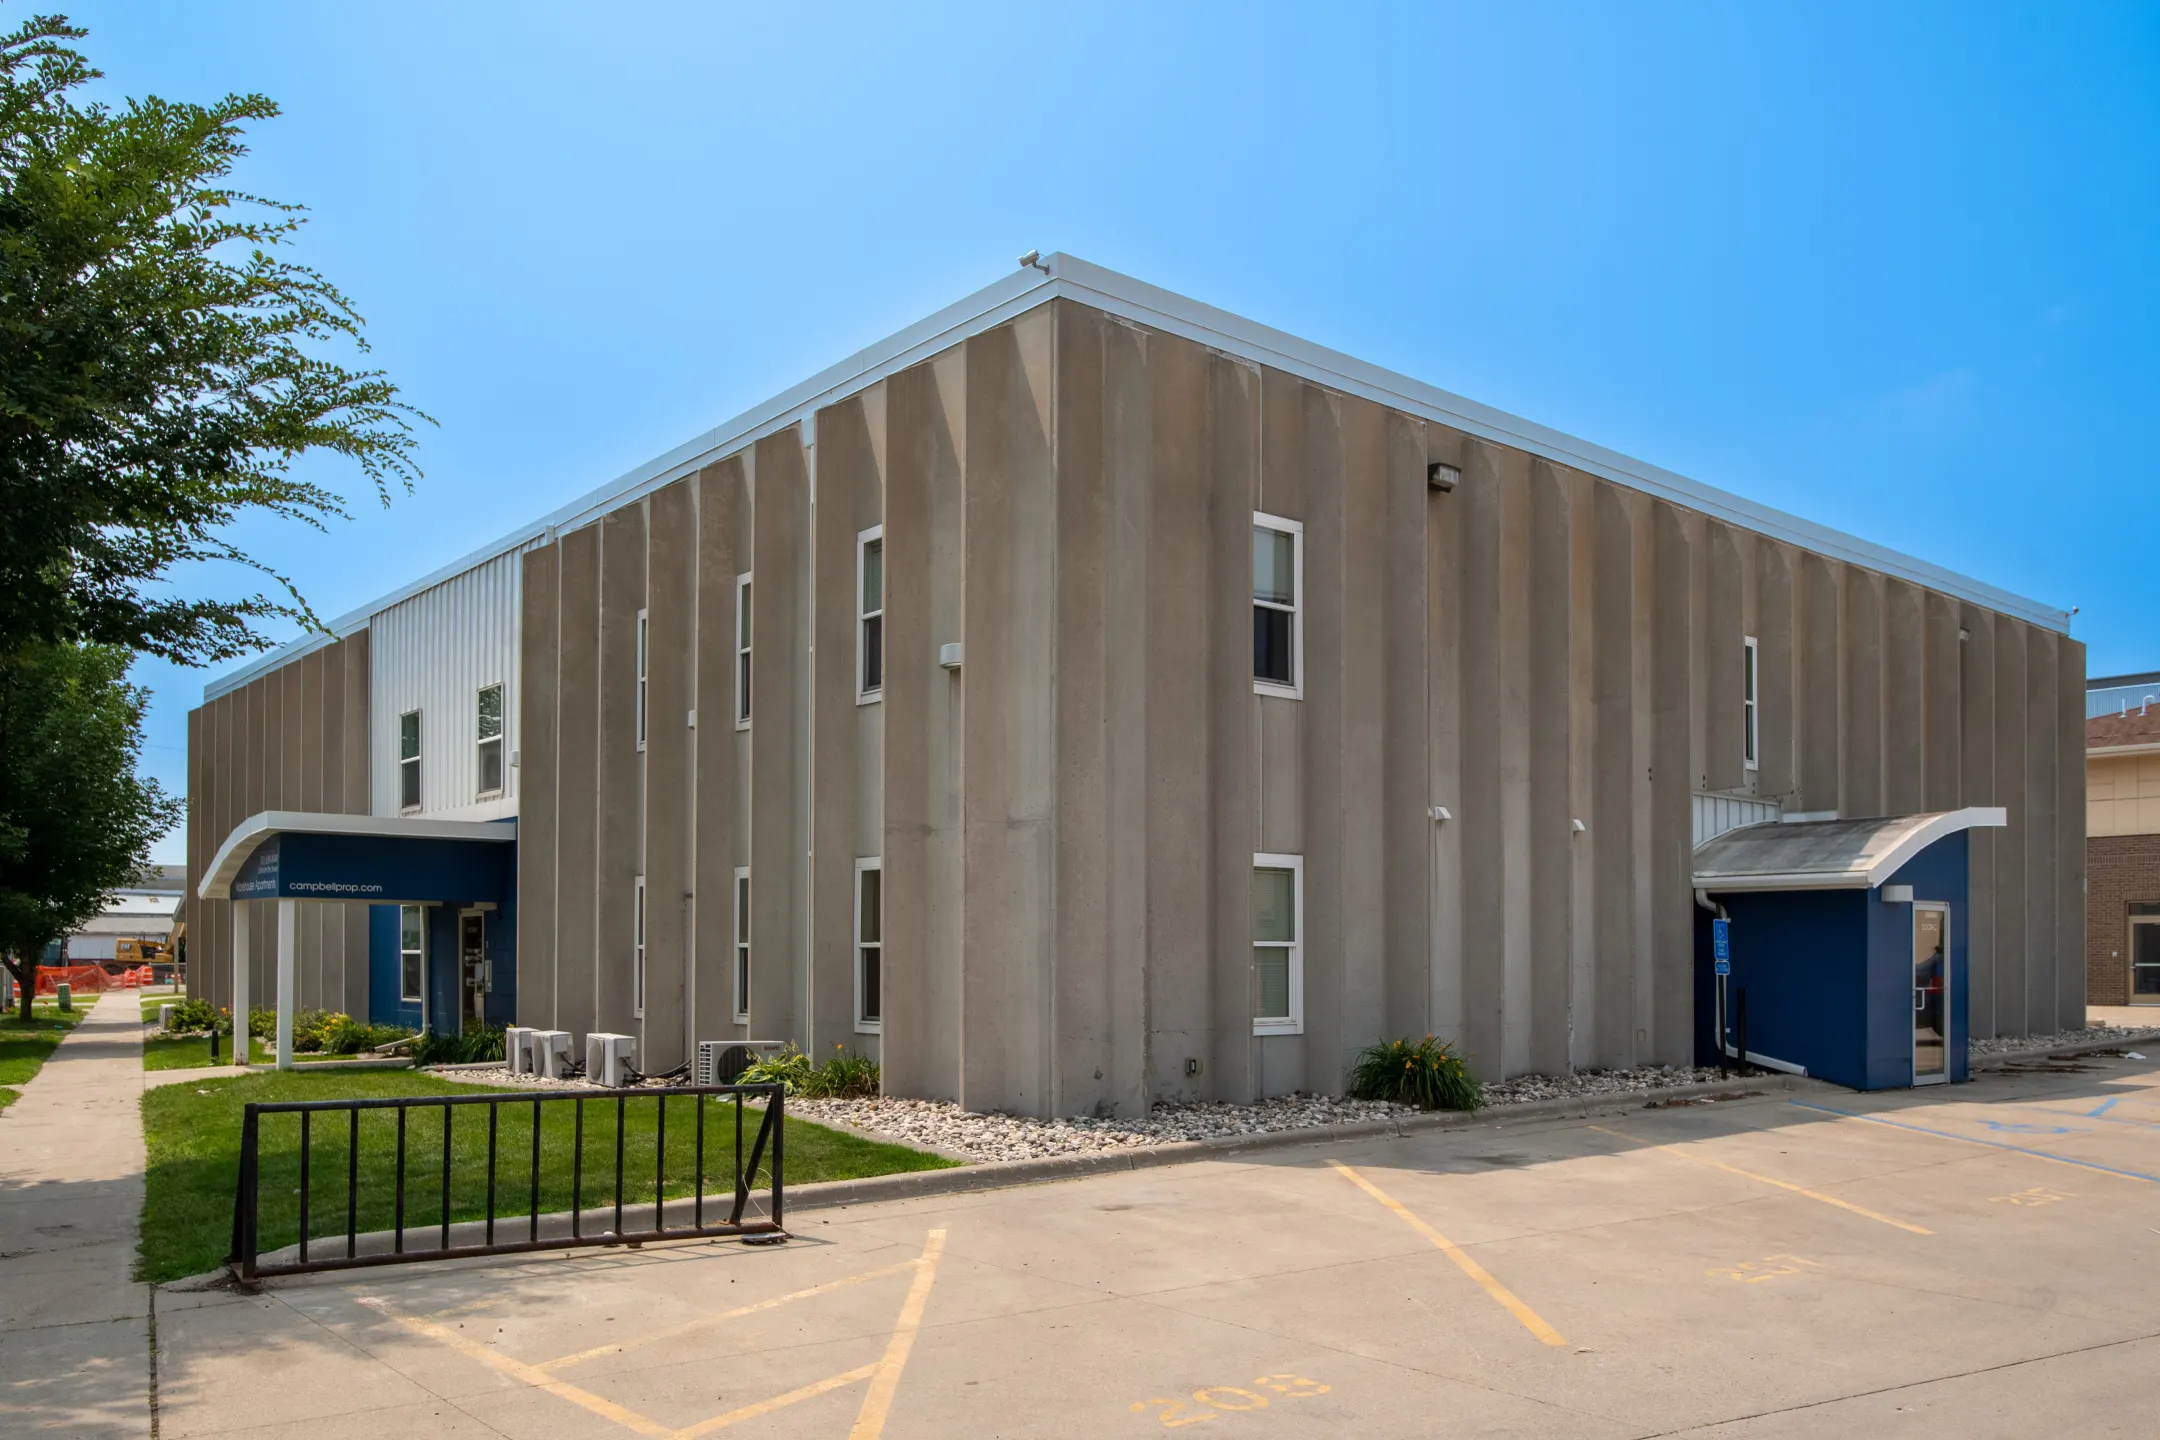 Building - Warehouse Apartments - Fargo, ND